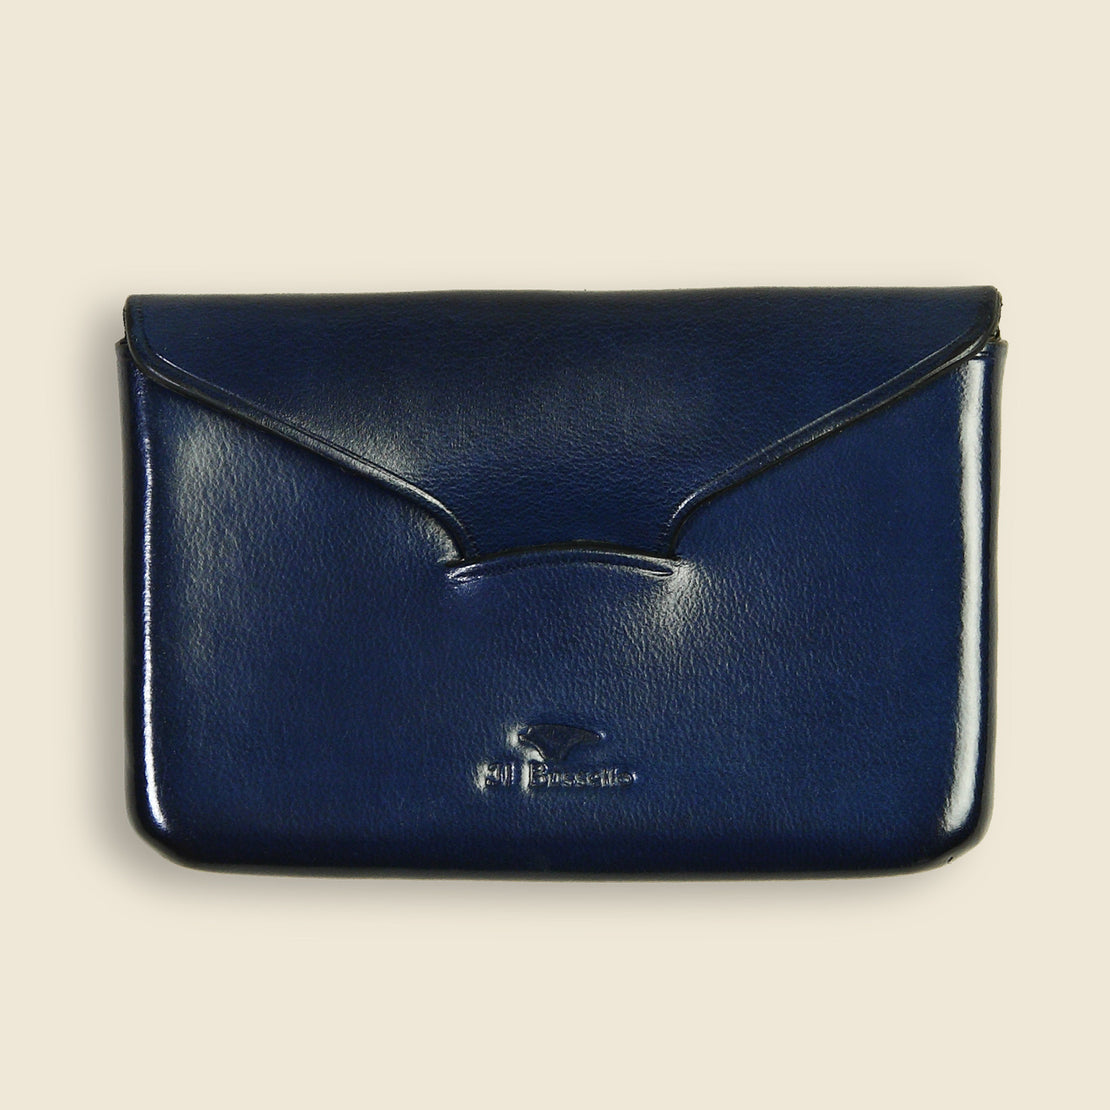 Il Bussetto Business Card Holder - Navy